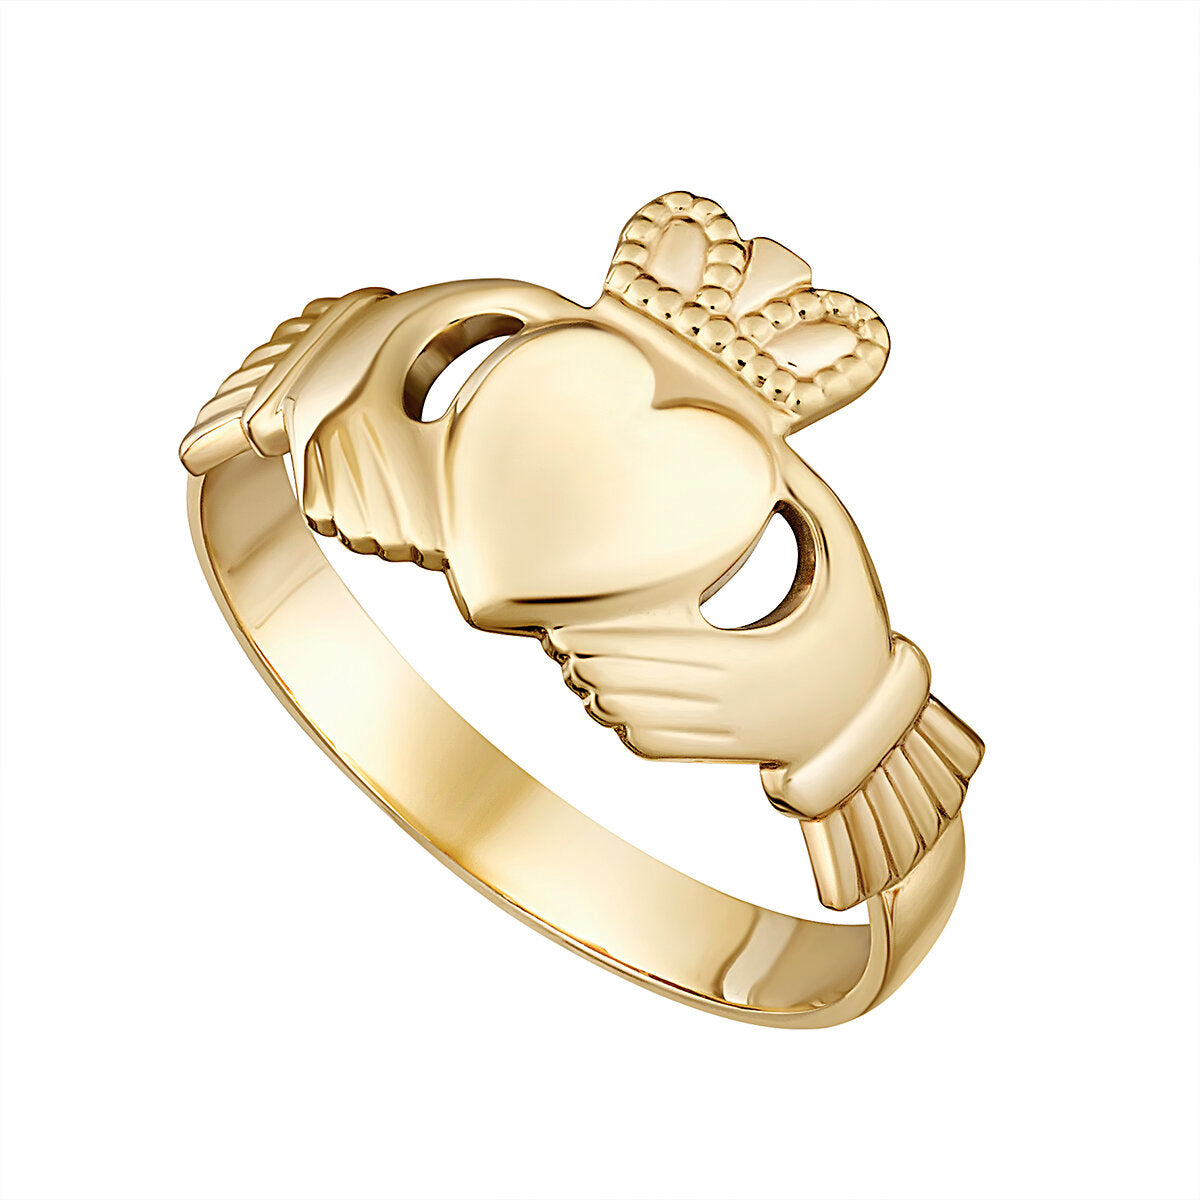 Men's 10ct Gold Claddagh Ring